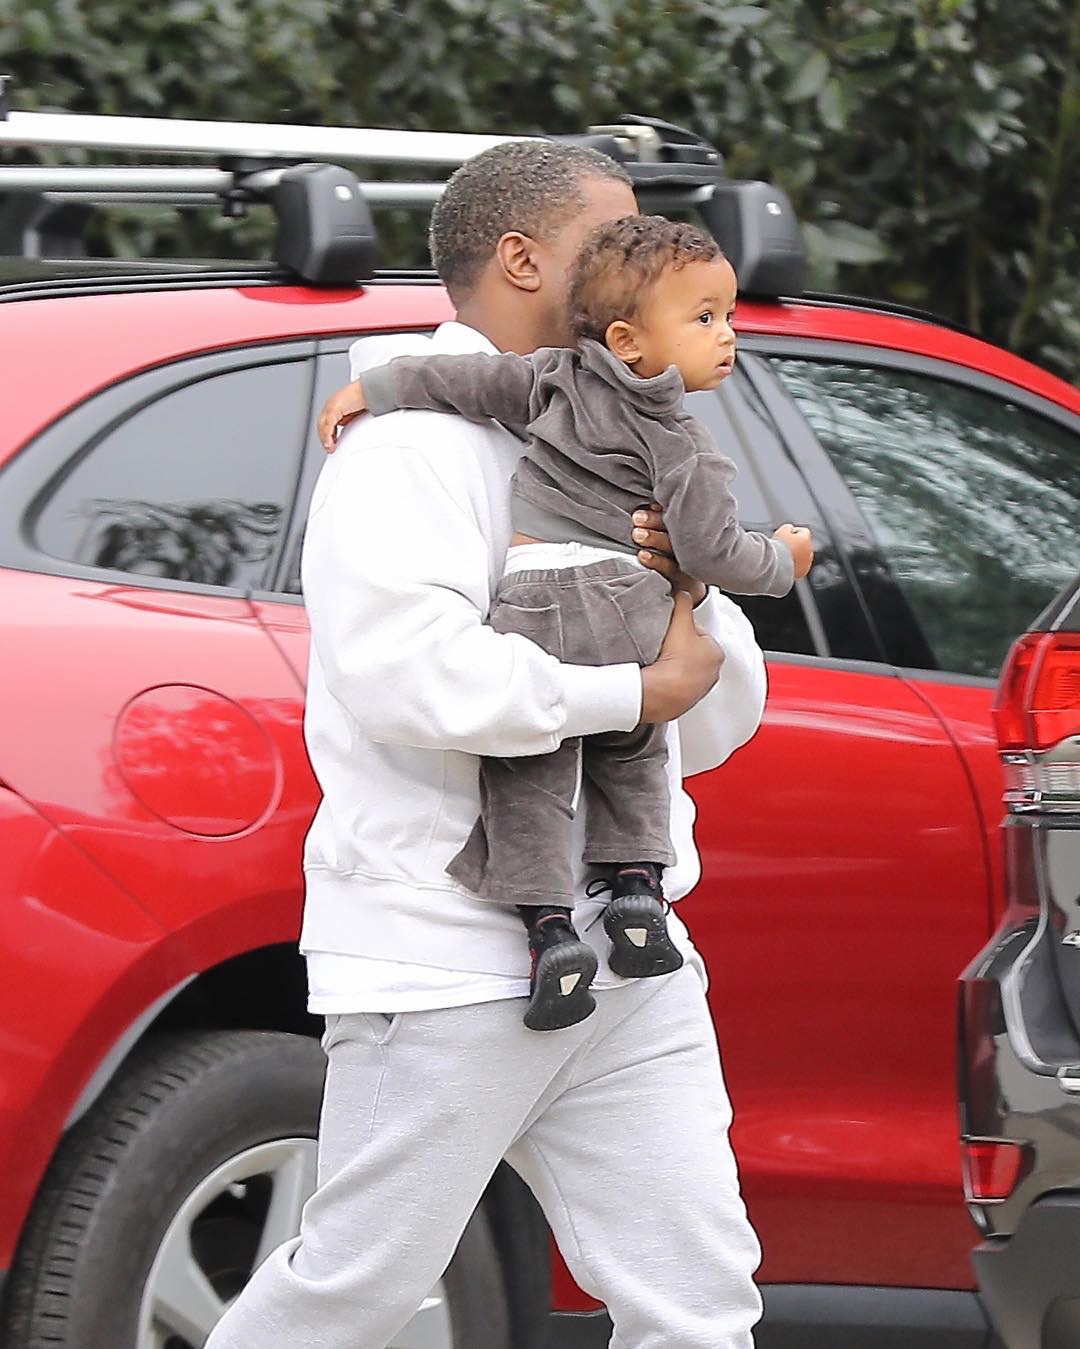 SPOTTED: Kanye West Wearing Champion Joggers and Yeezy Season Calabasas Sneakers